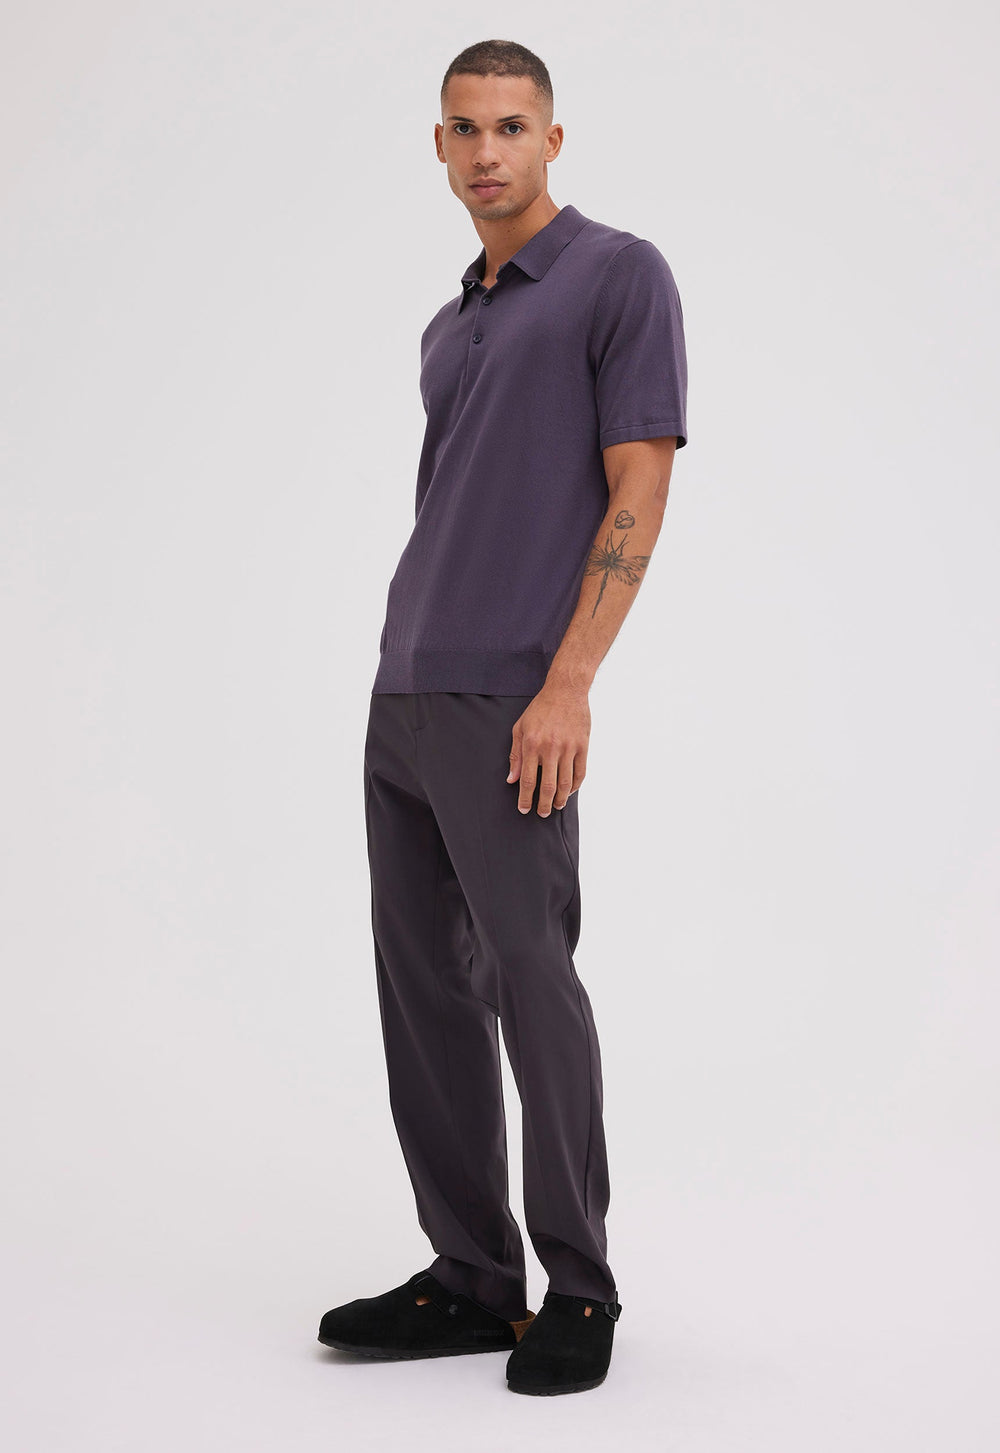 Jac+Jack Pointier Cotton Polo - Muse Charcoal